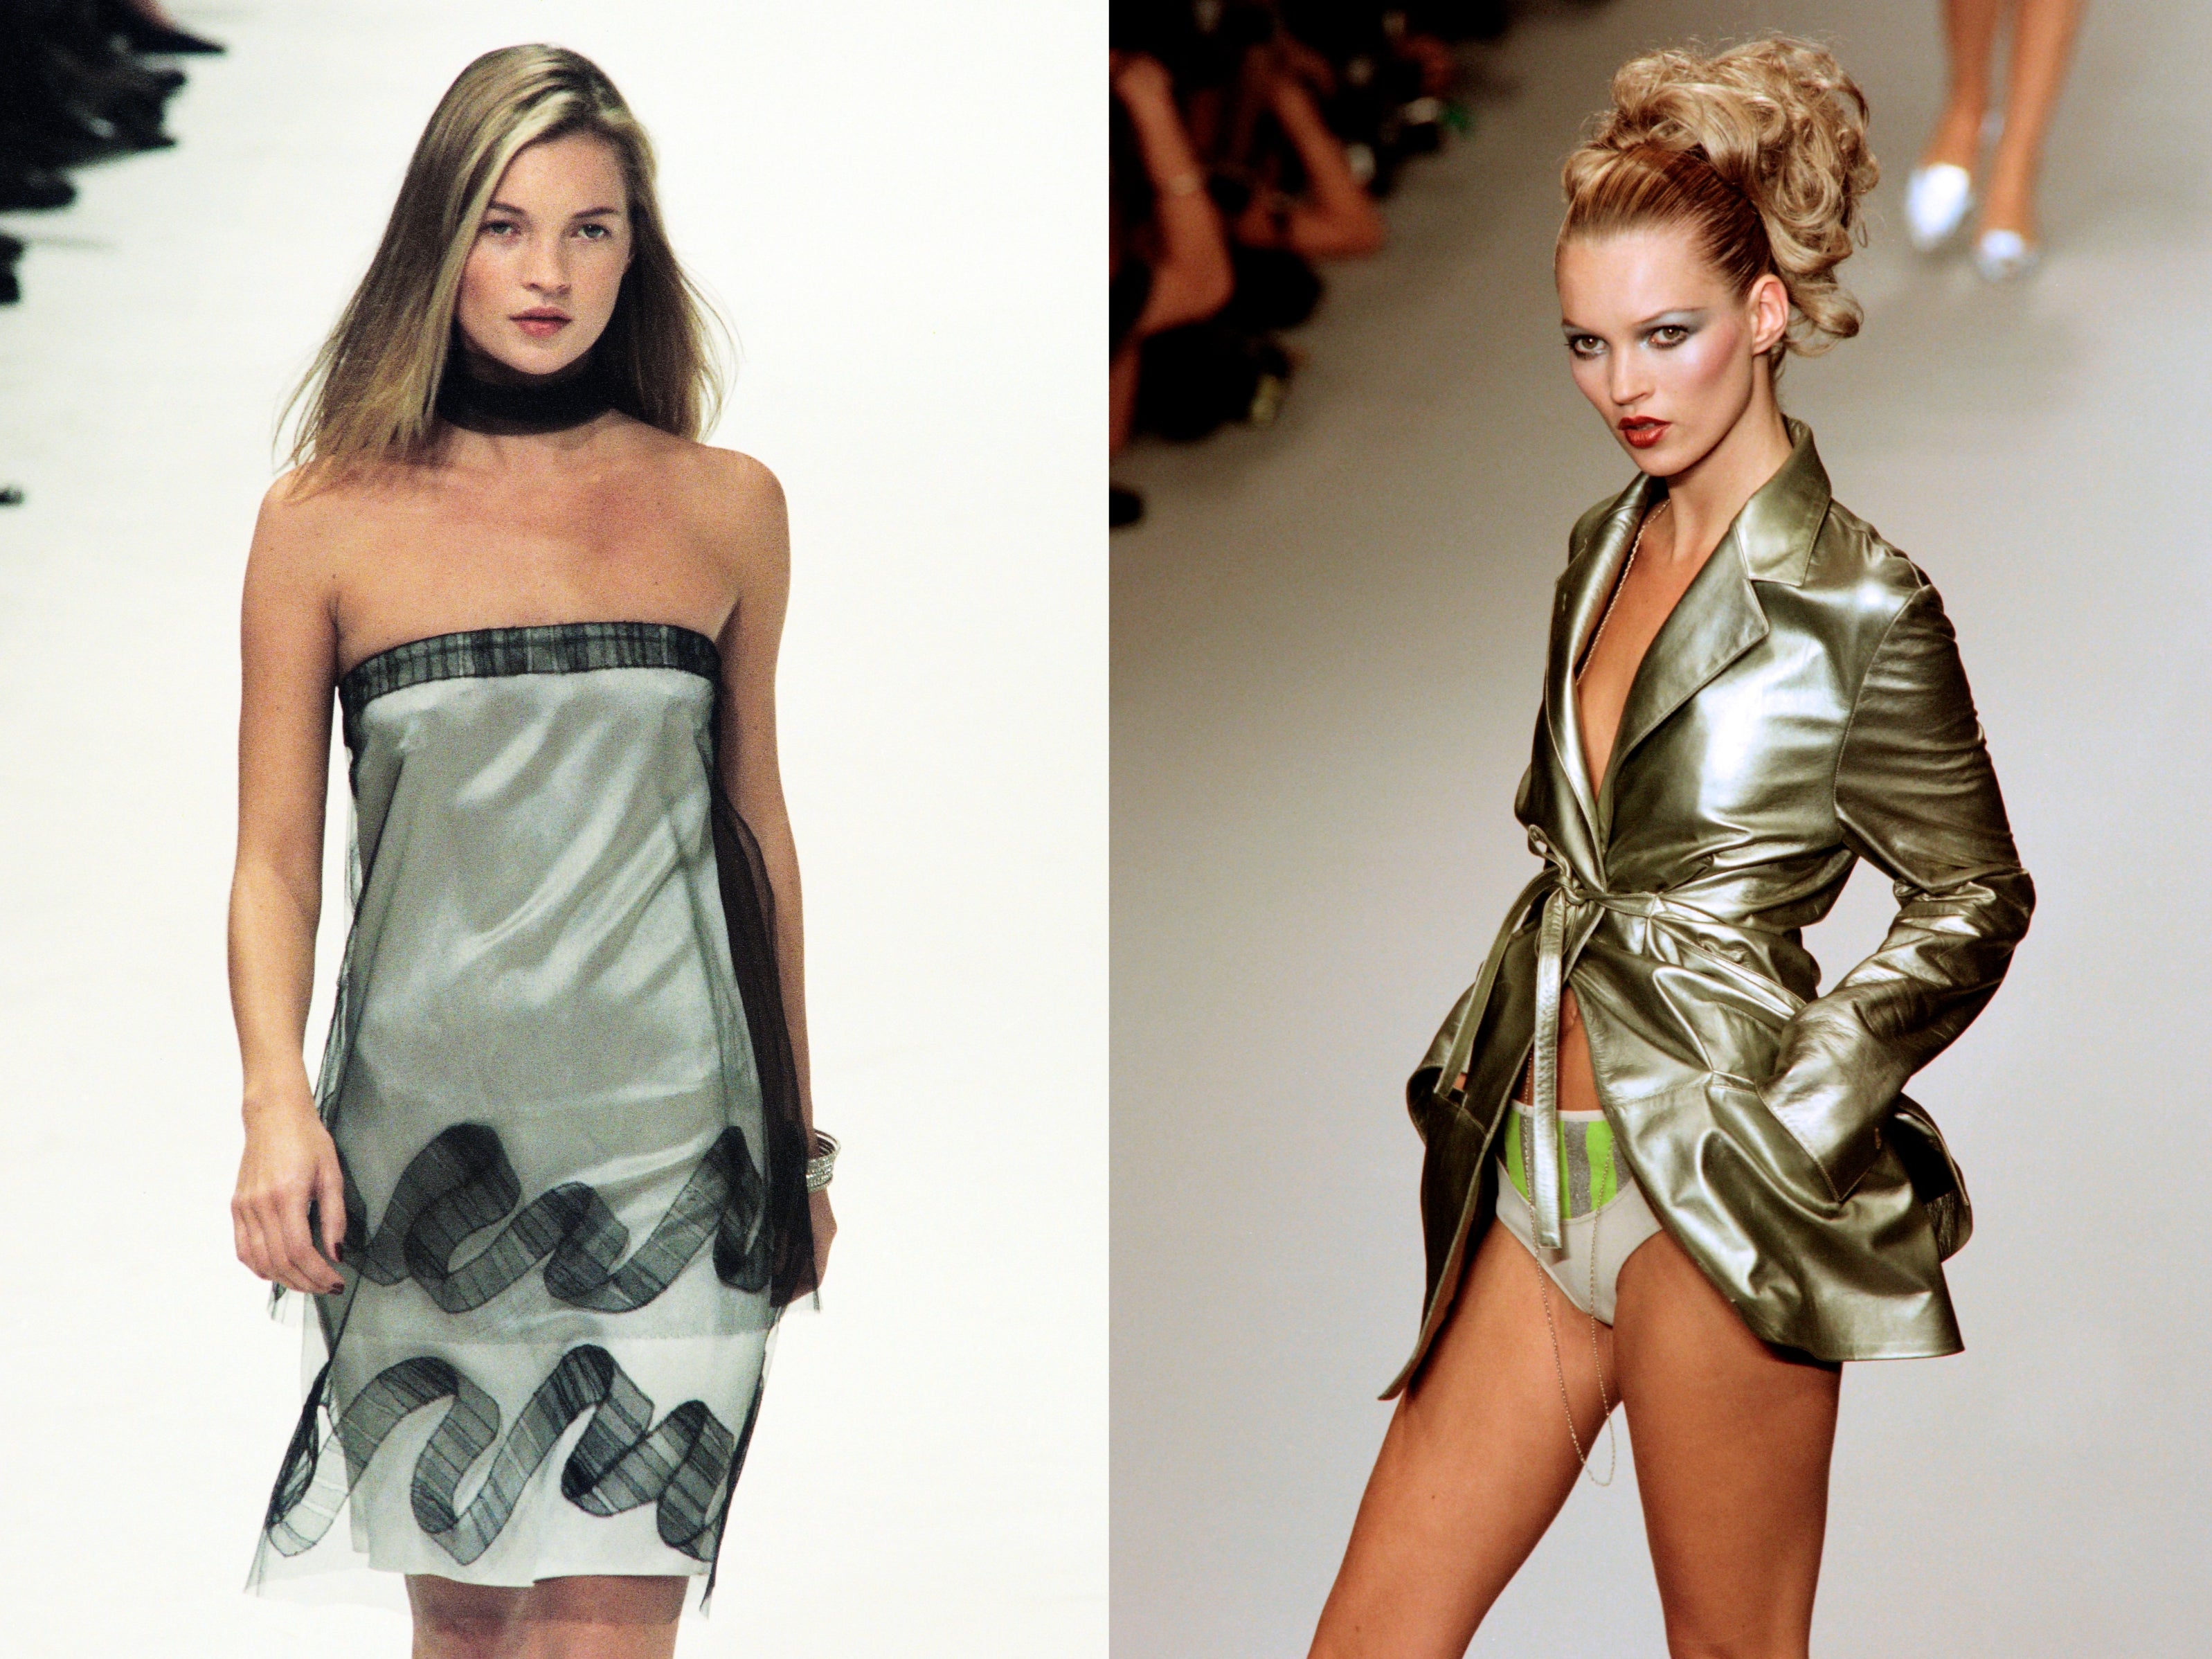 Kate Moss is one of the most iconic supermodels from the nineties